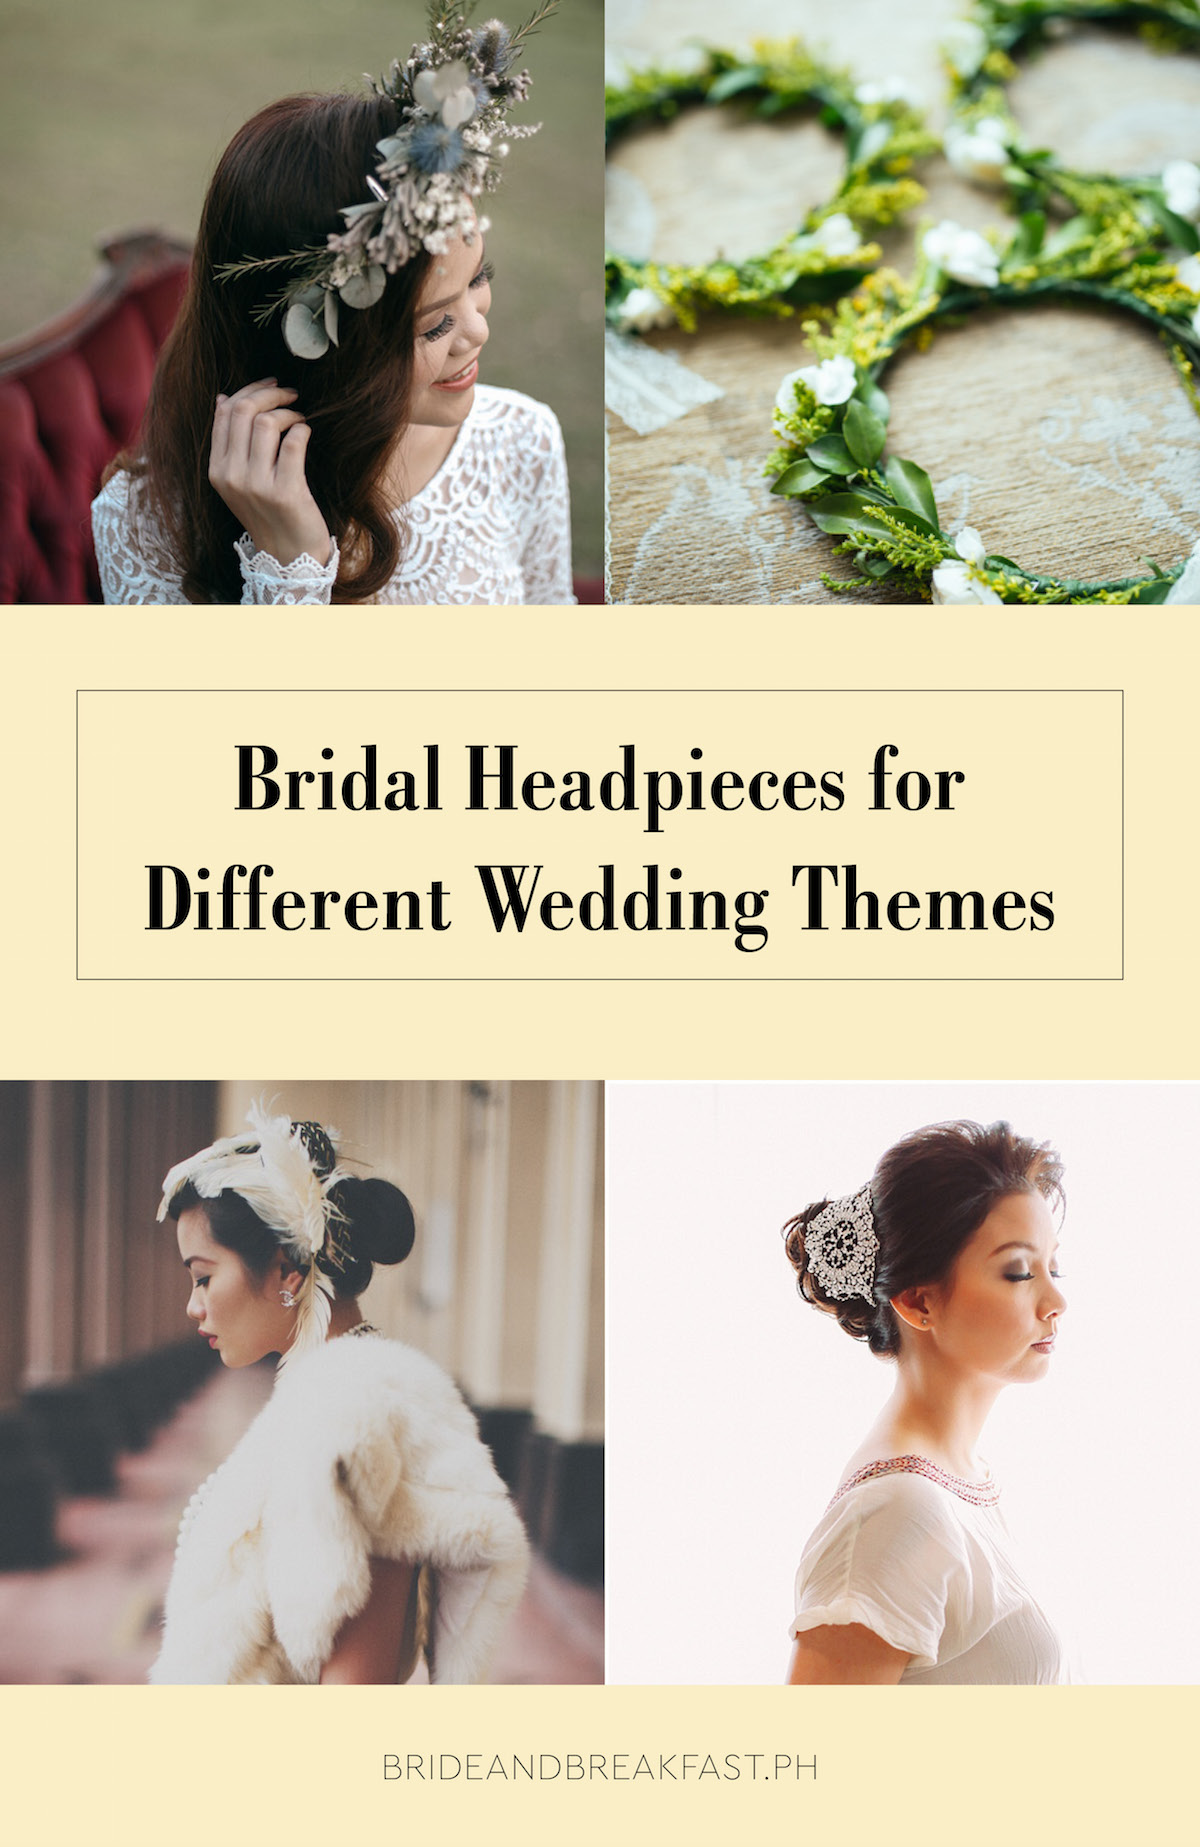 Bridal Headpieces for Different Wedding Themes